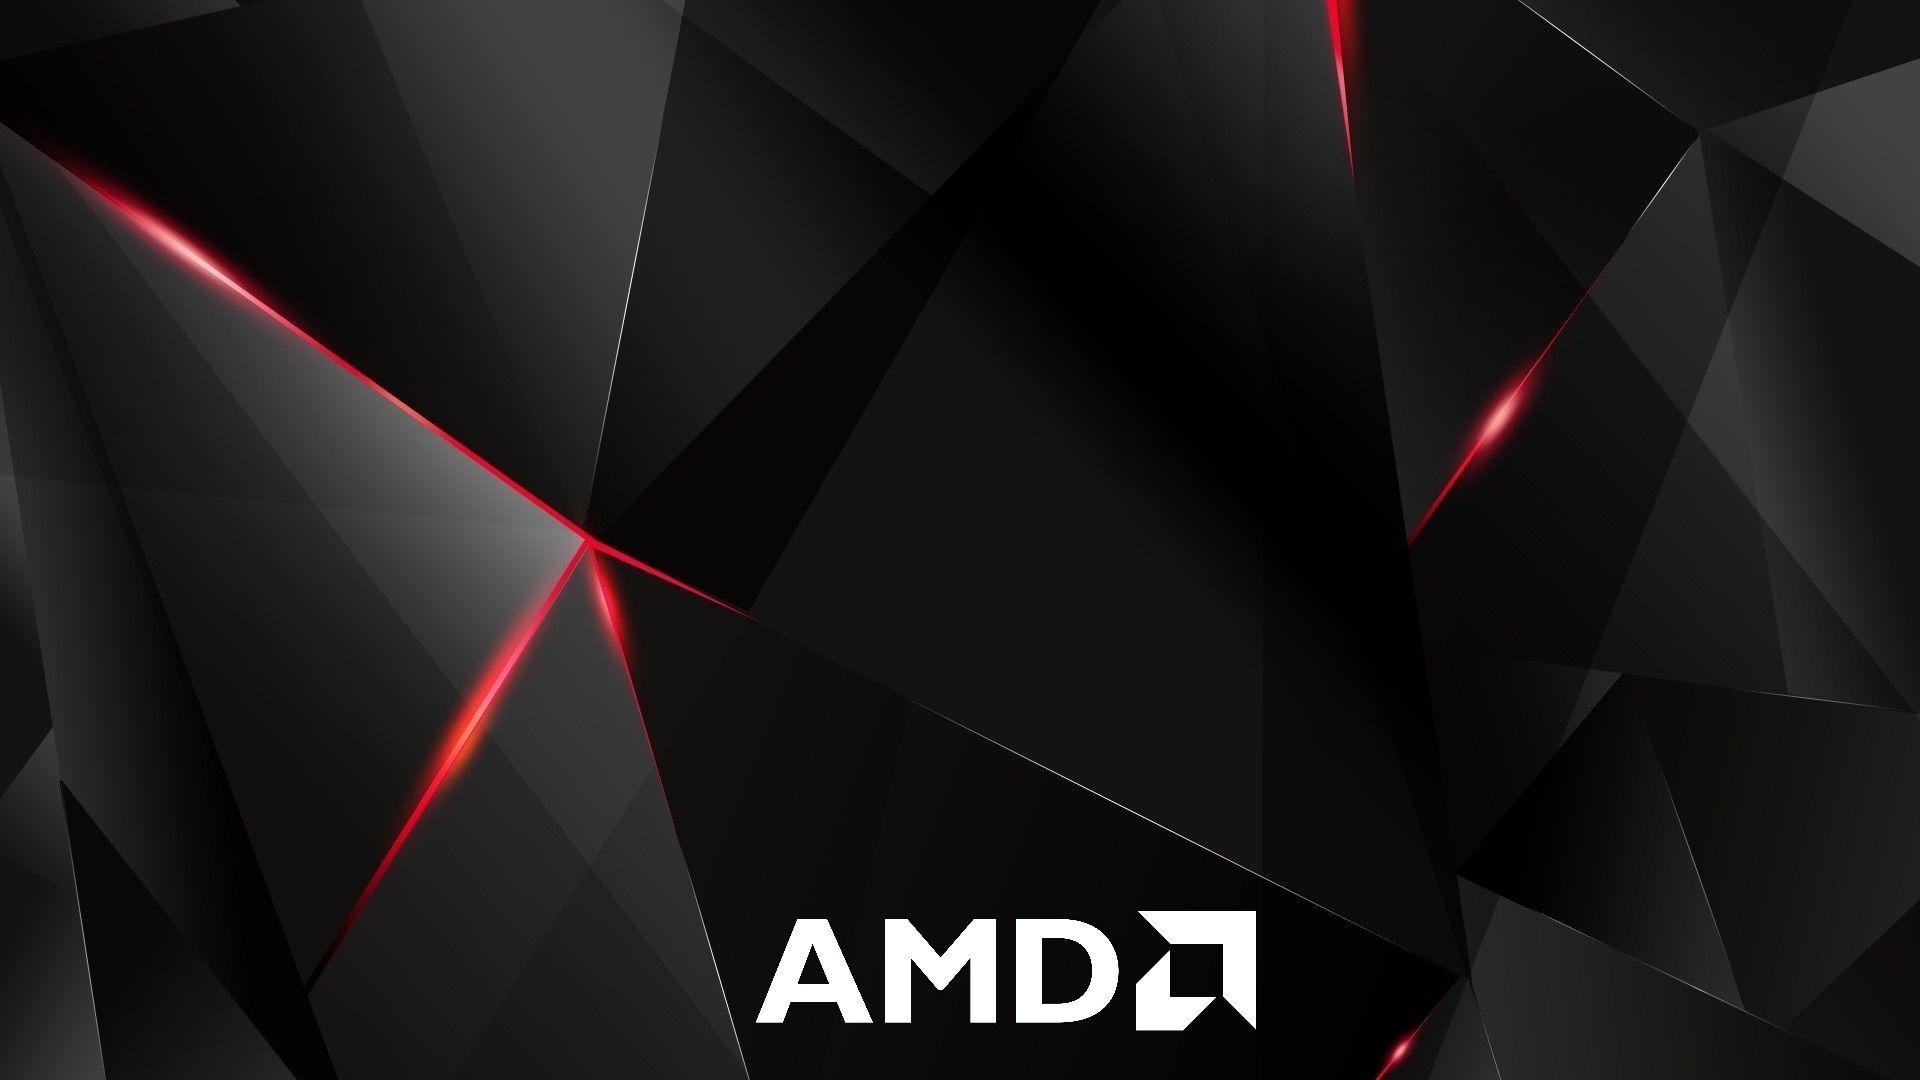 AMD Driver 16.1.1 Hotfix To Resolve Fallout 4 Crossfire Issues